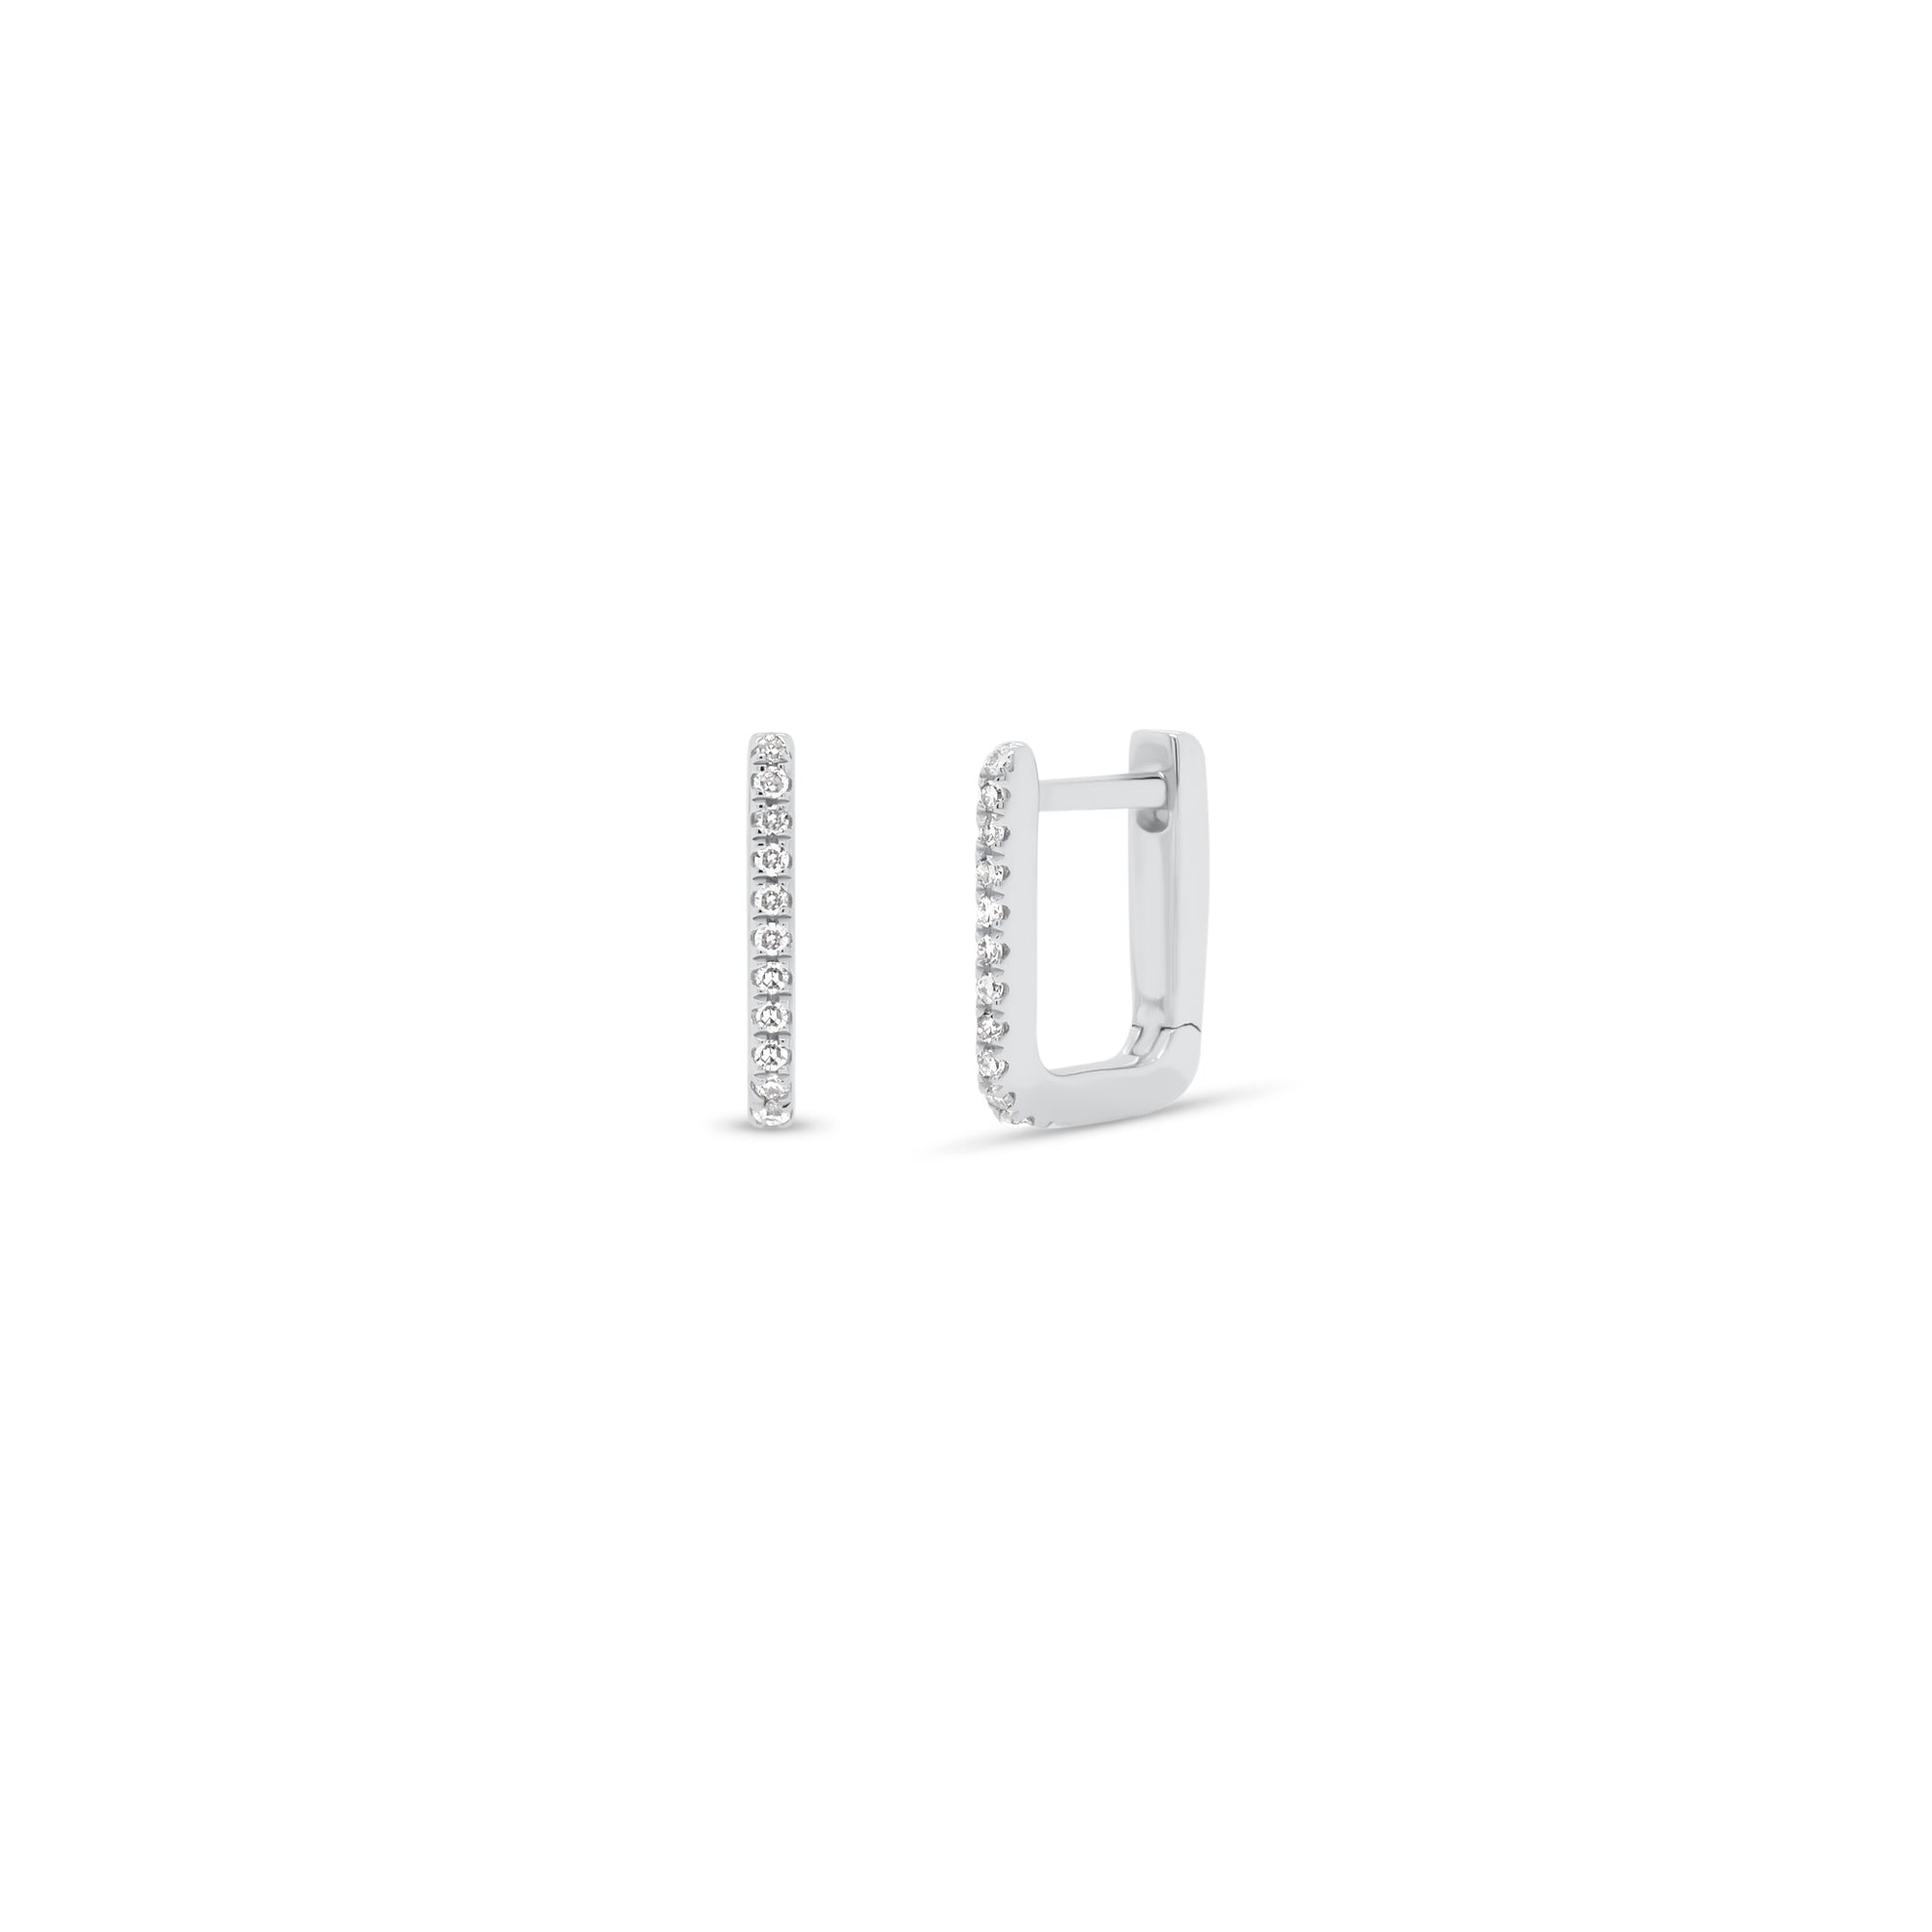 Diamond Square Huggie Earrings - 14K white gold weighing 1.19 grams  - 24 round diamonds totaling 0.07 carats